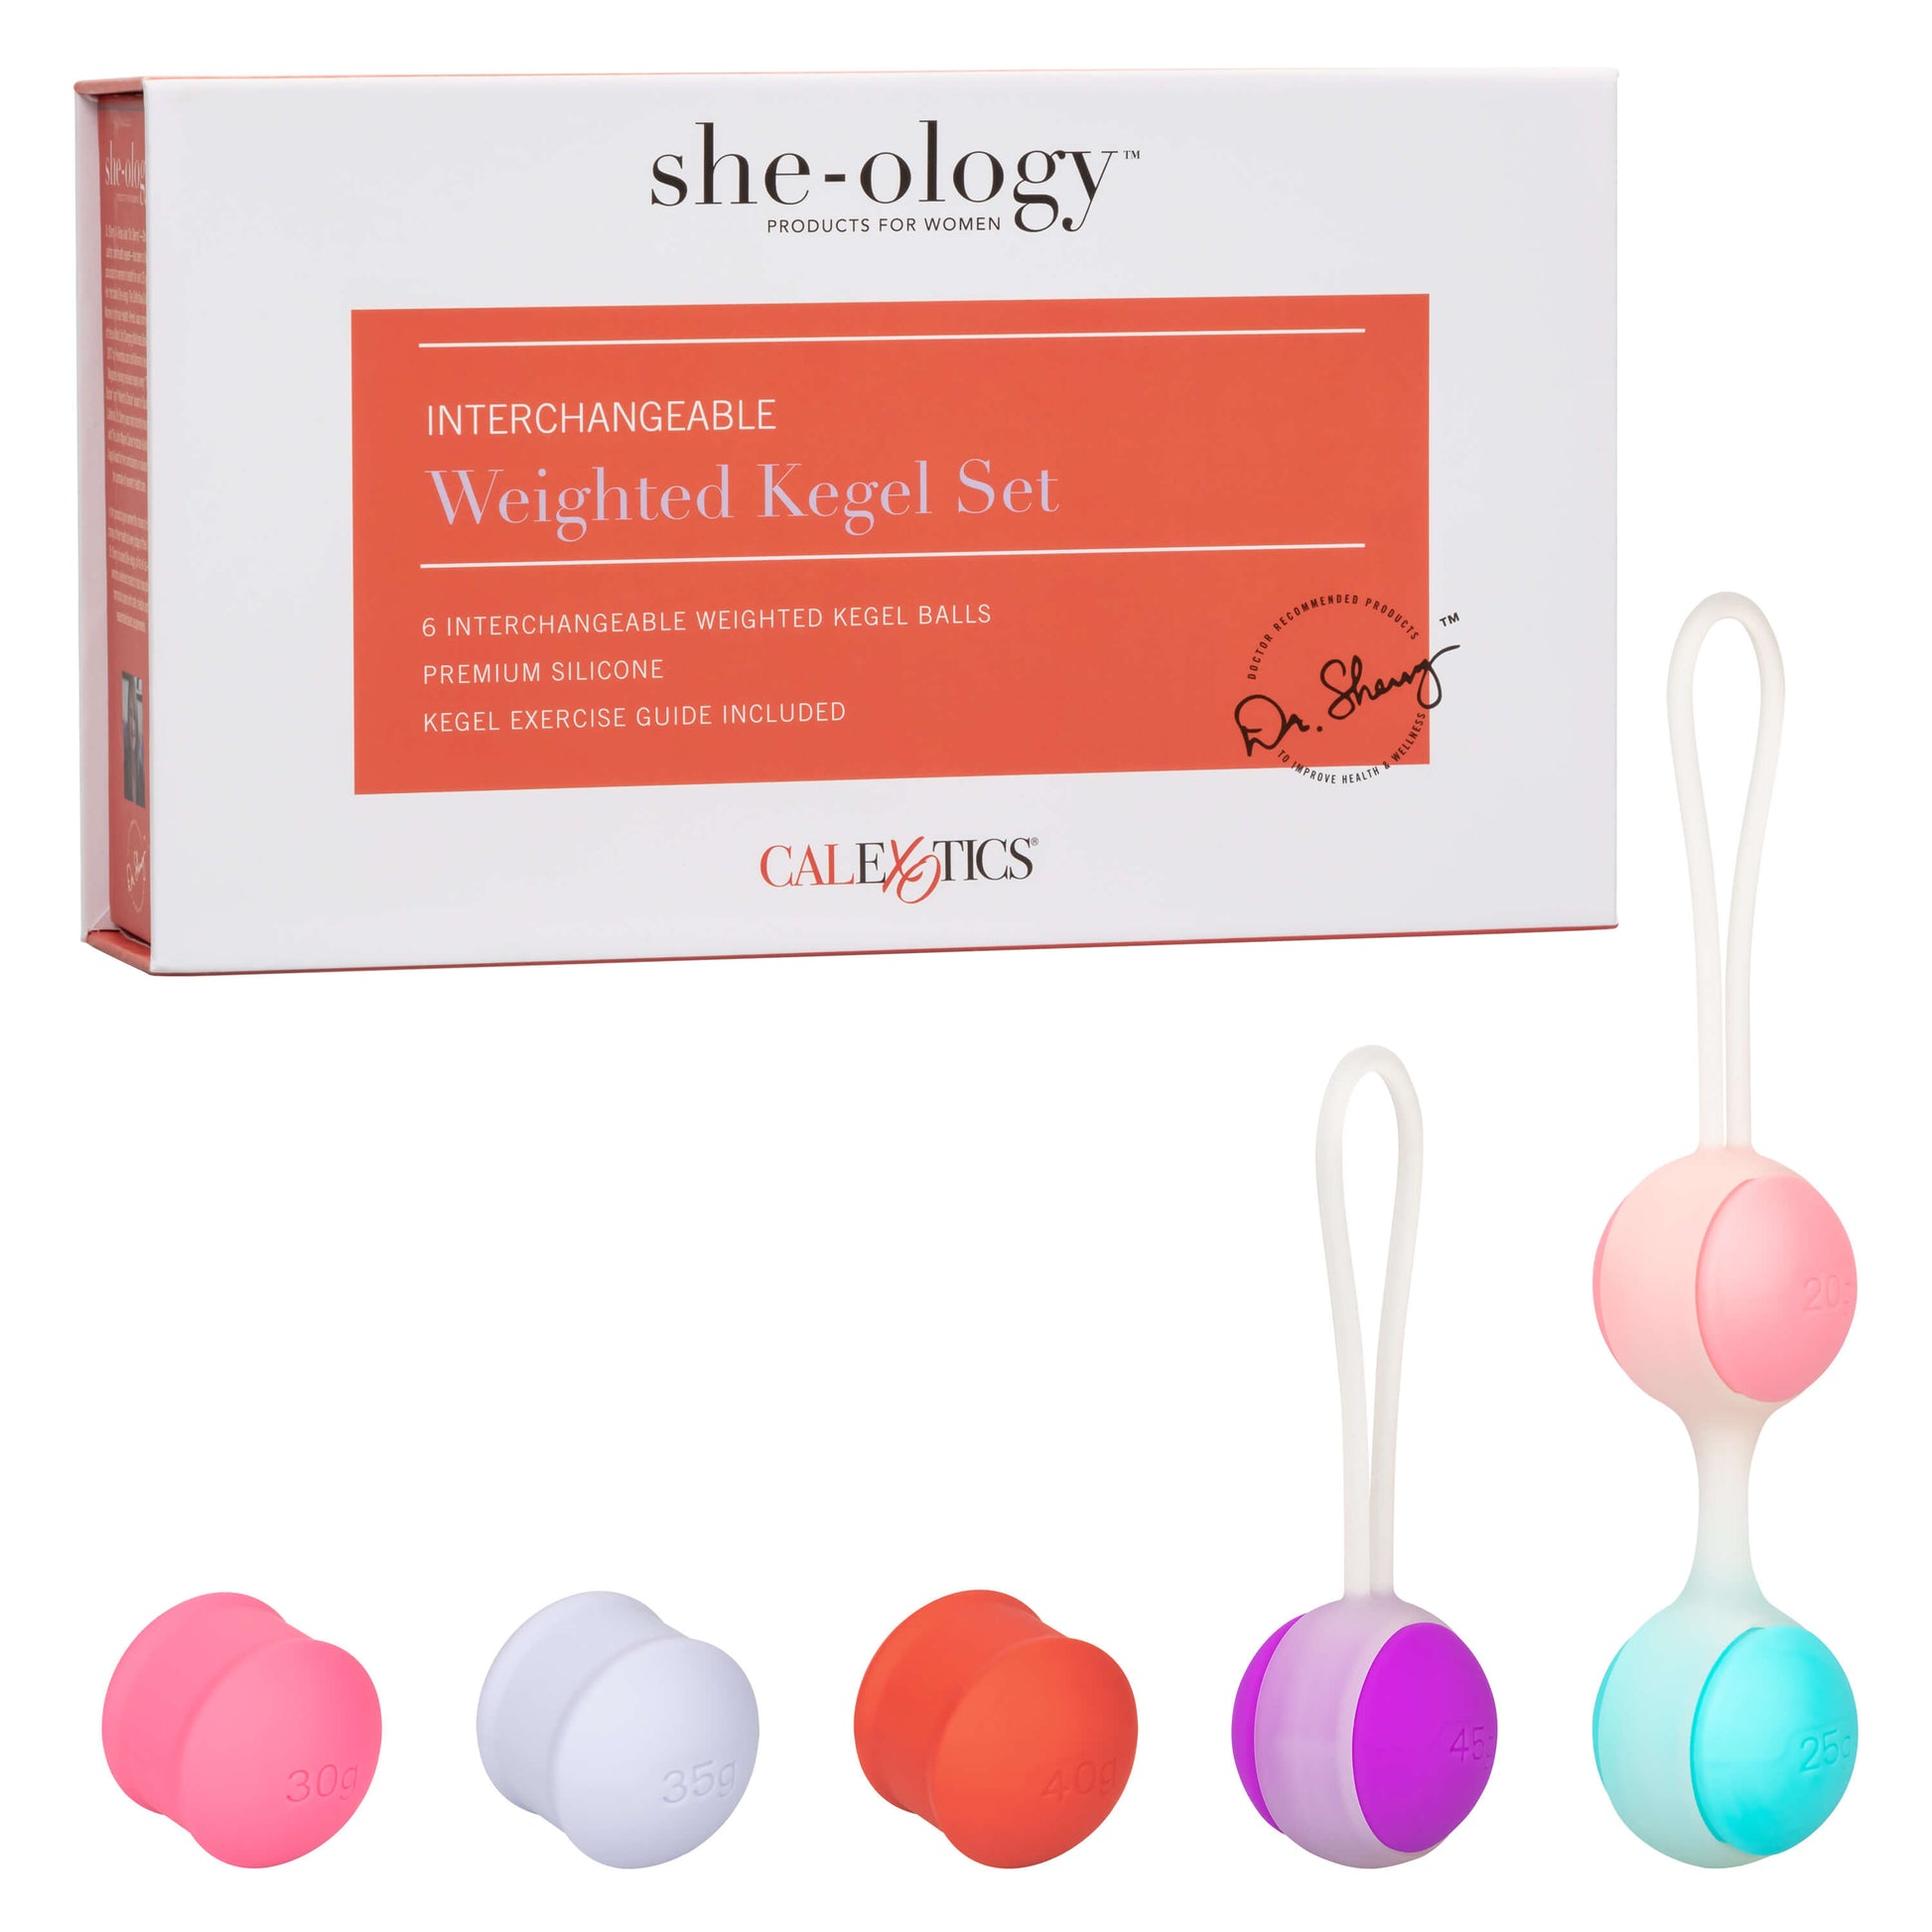 She-Ology Weighted Kegel Set - by The Bigger O an online sex toy shop. We ship to USA, Canada and the UK.